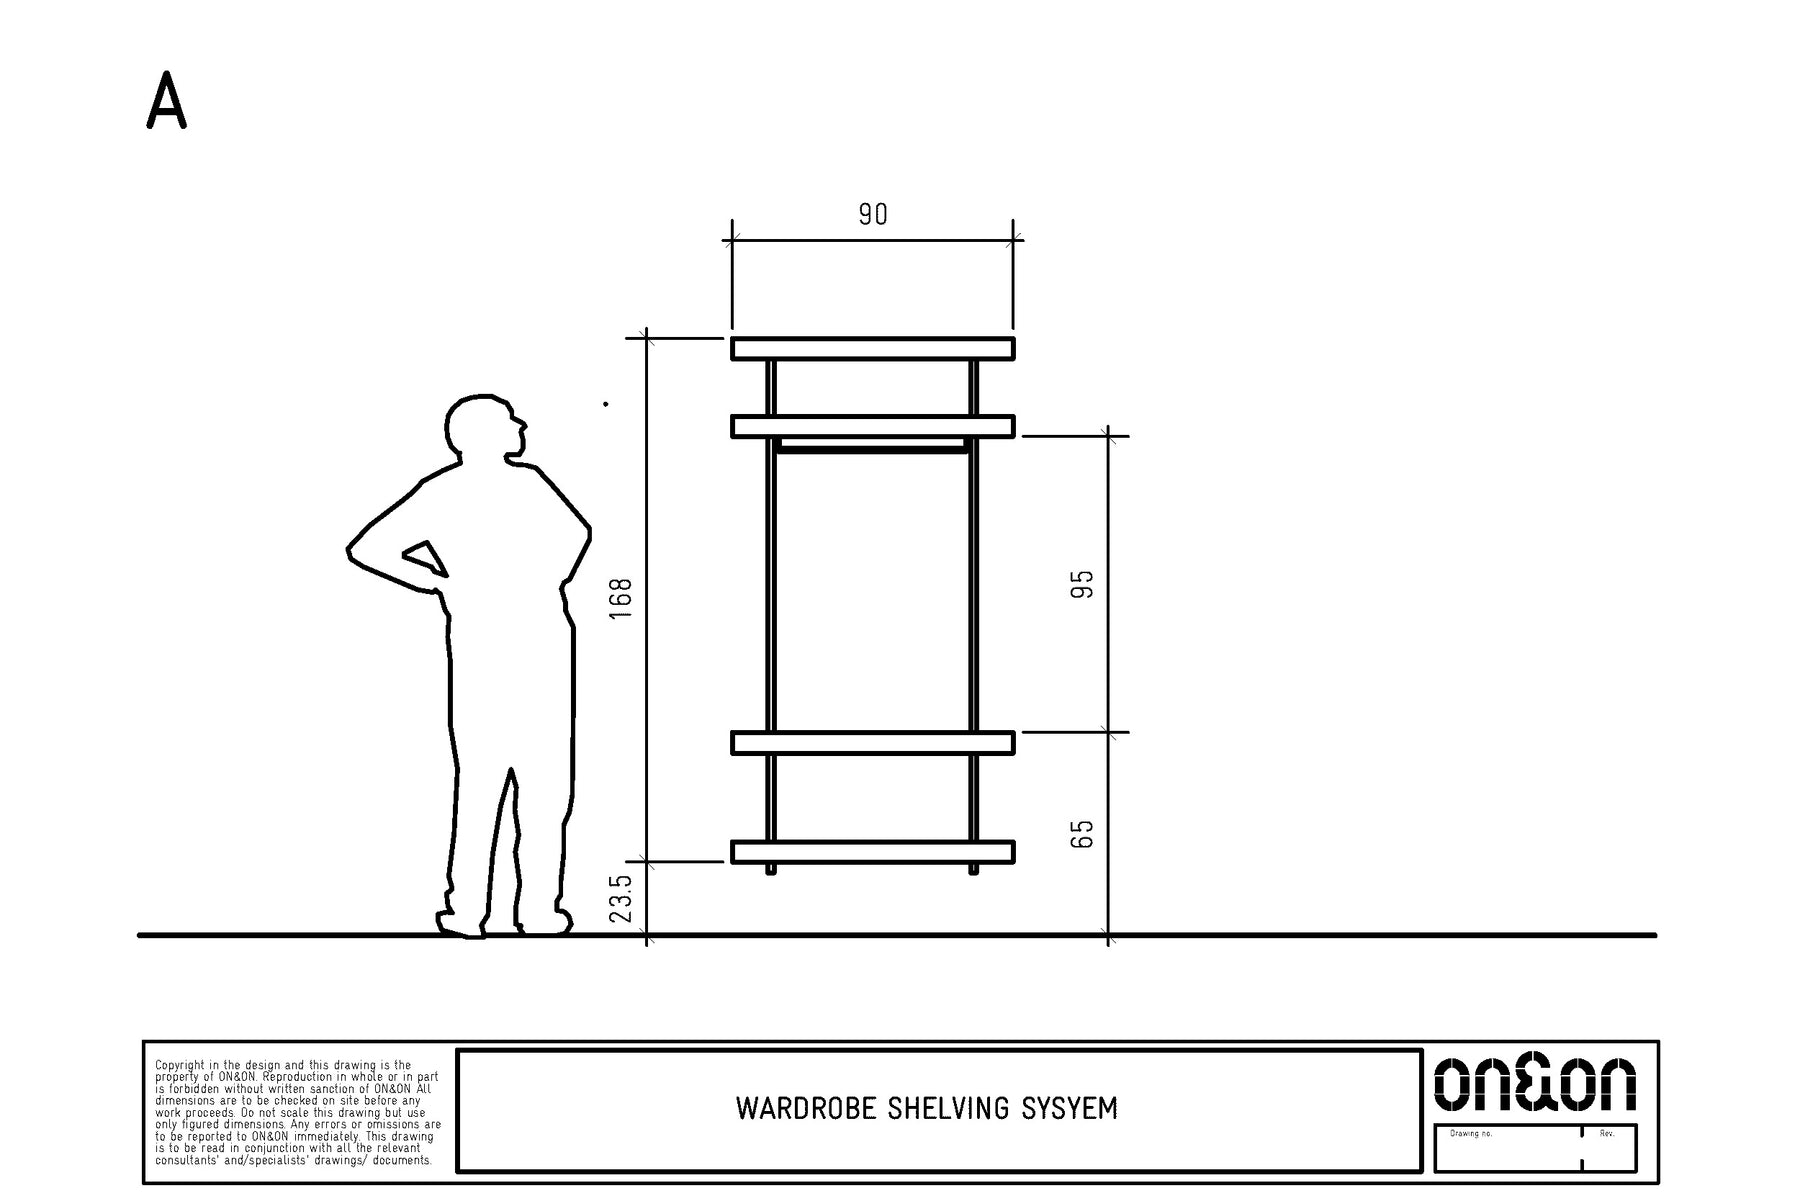 clothing shelving system drawing A with dimensions